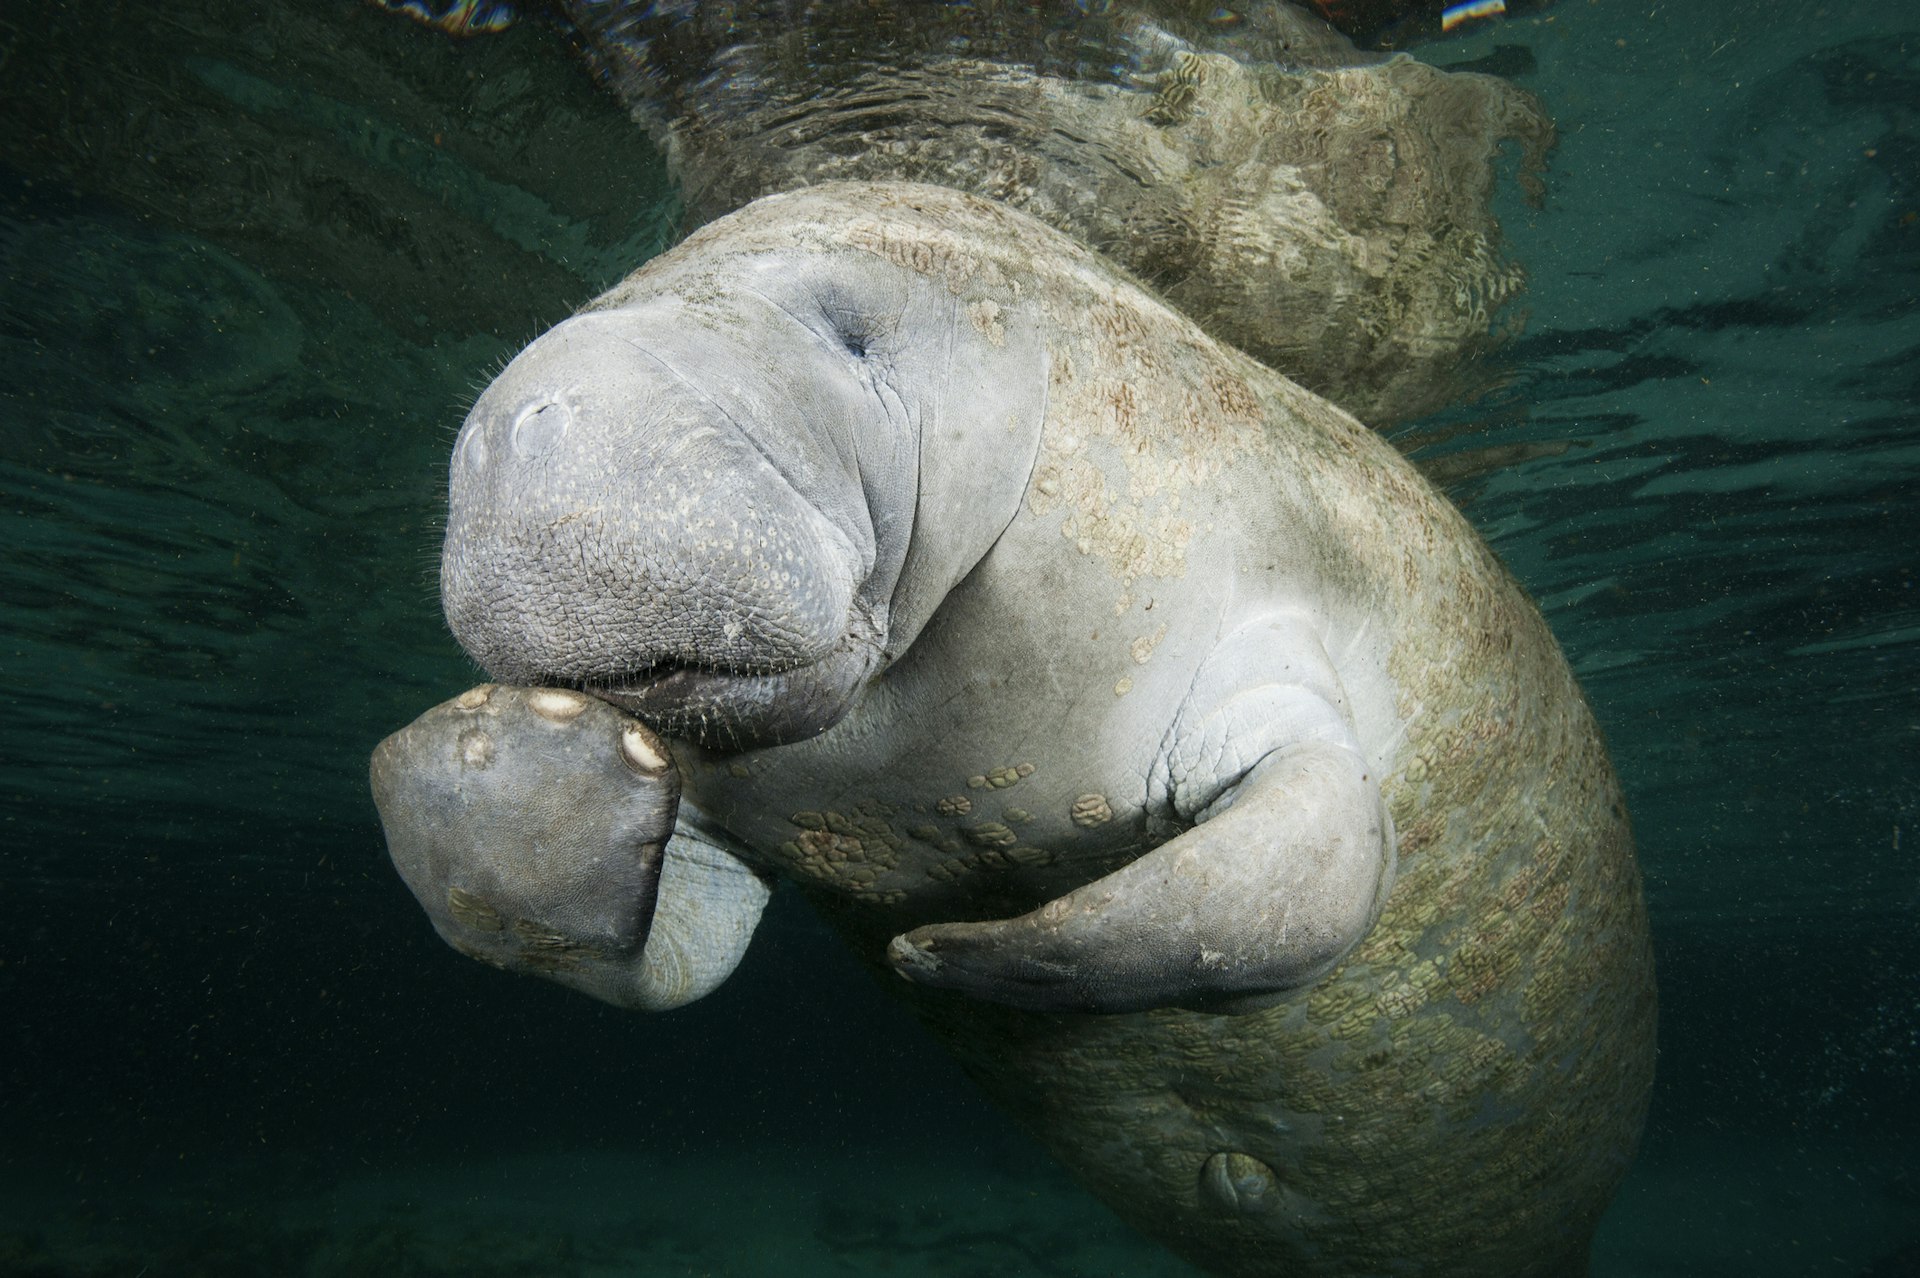 A manatee swims at Three Sisters Springs, Florida putting its fin near its mouth